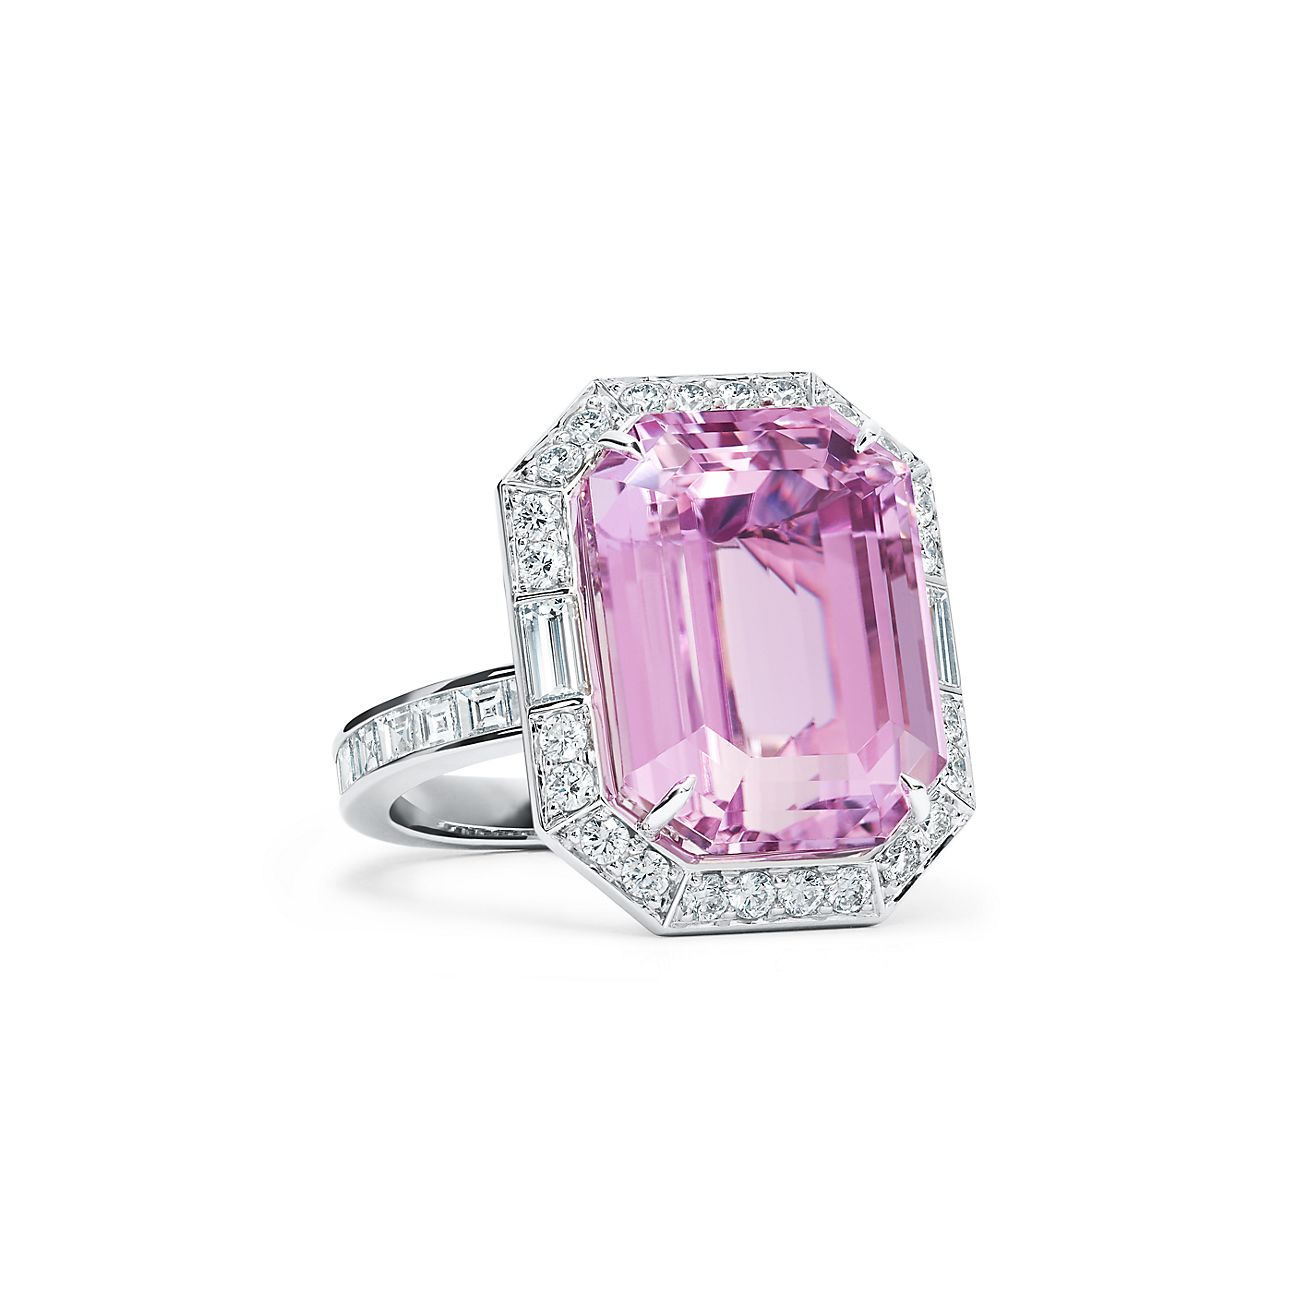 Ring in platinum with a kunzite of over 